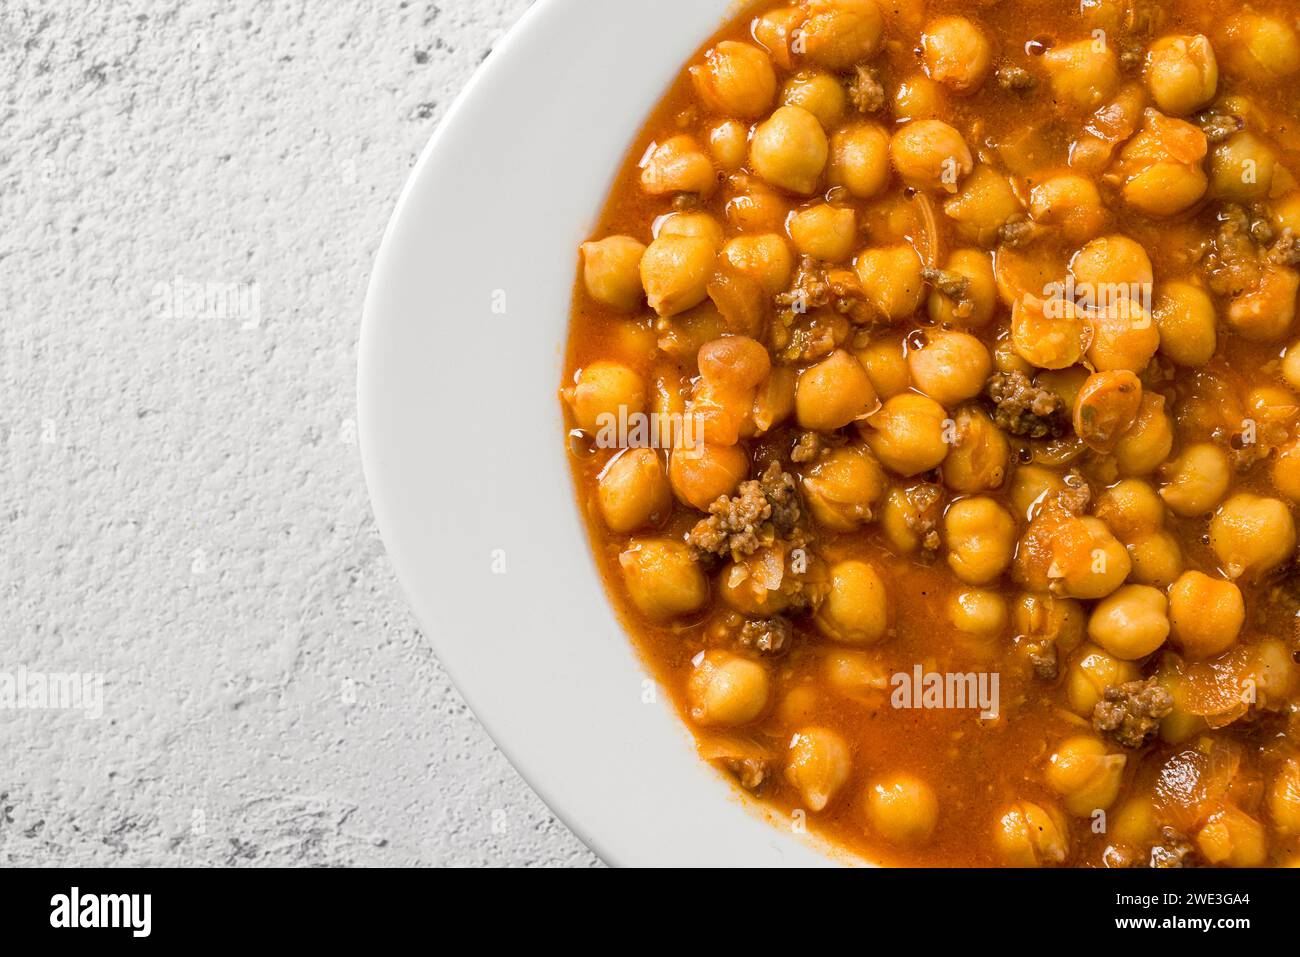 Chickpea stew with minced meat on a white porcelain plate on a stone table Stock Photo